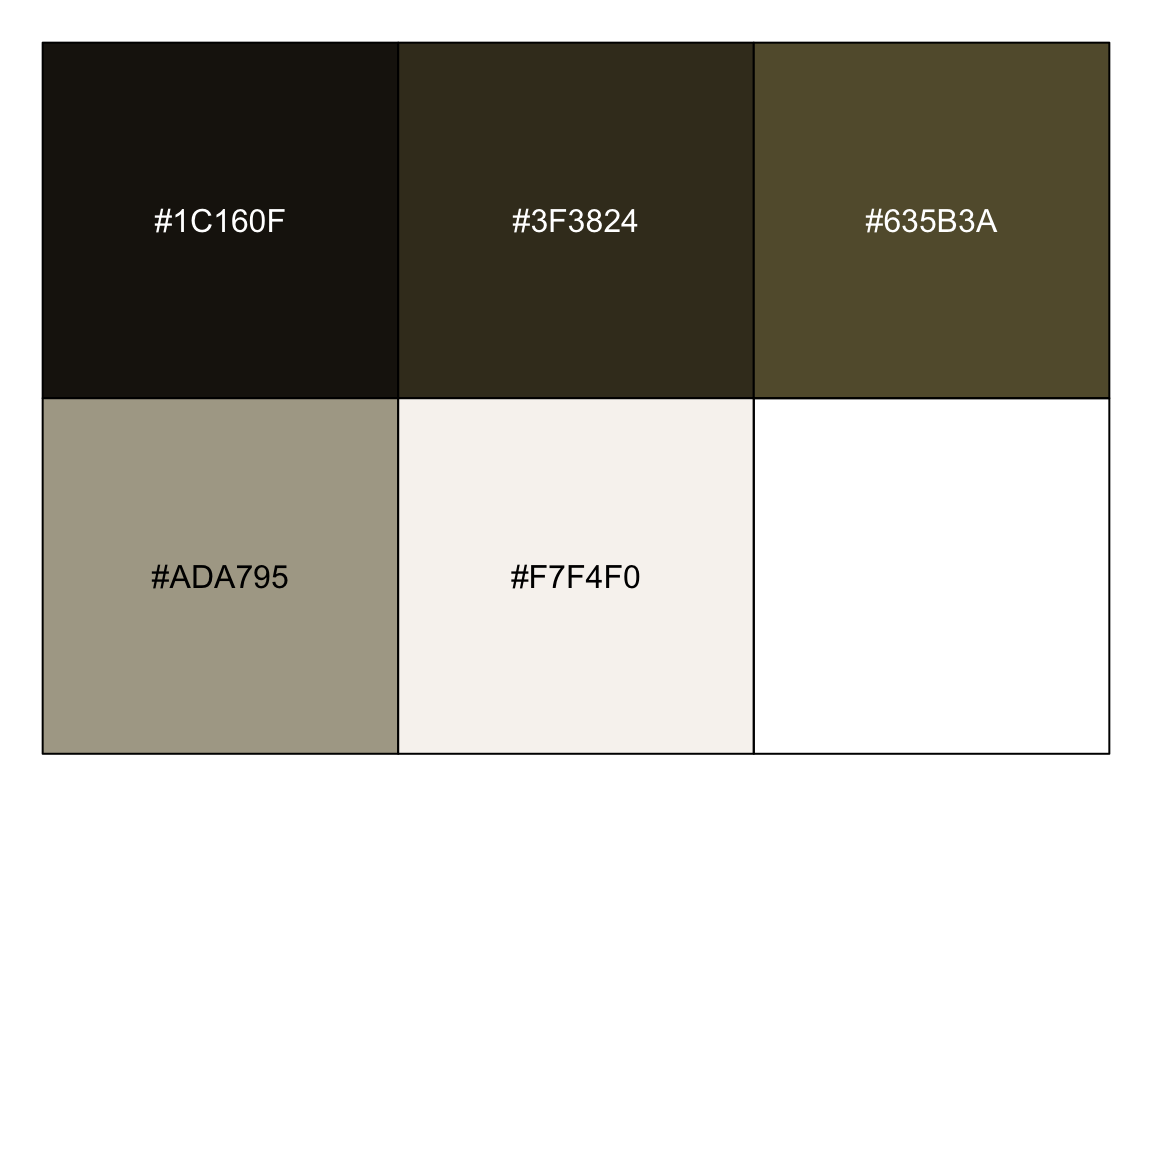 The five colors of the TTPD color palette. The hexadecimal codes are #1C160F, #3F3824, #635B3A, #ADA795, and #F7F4F0